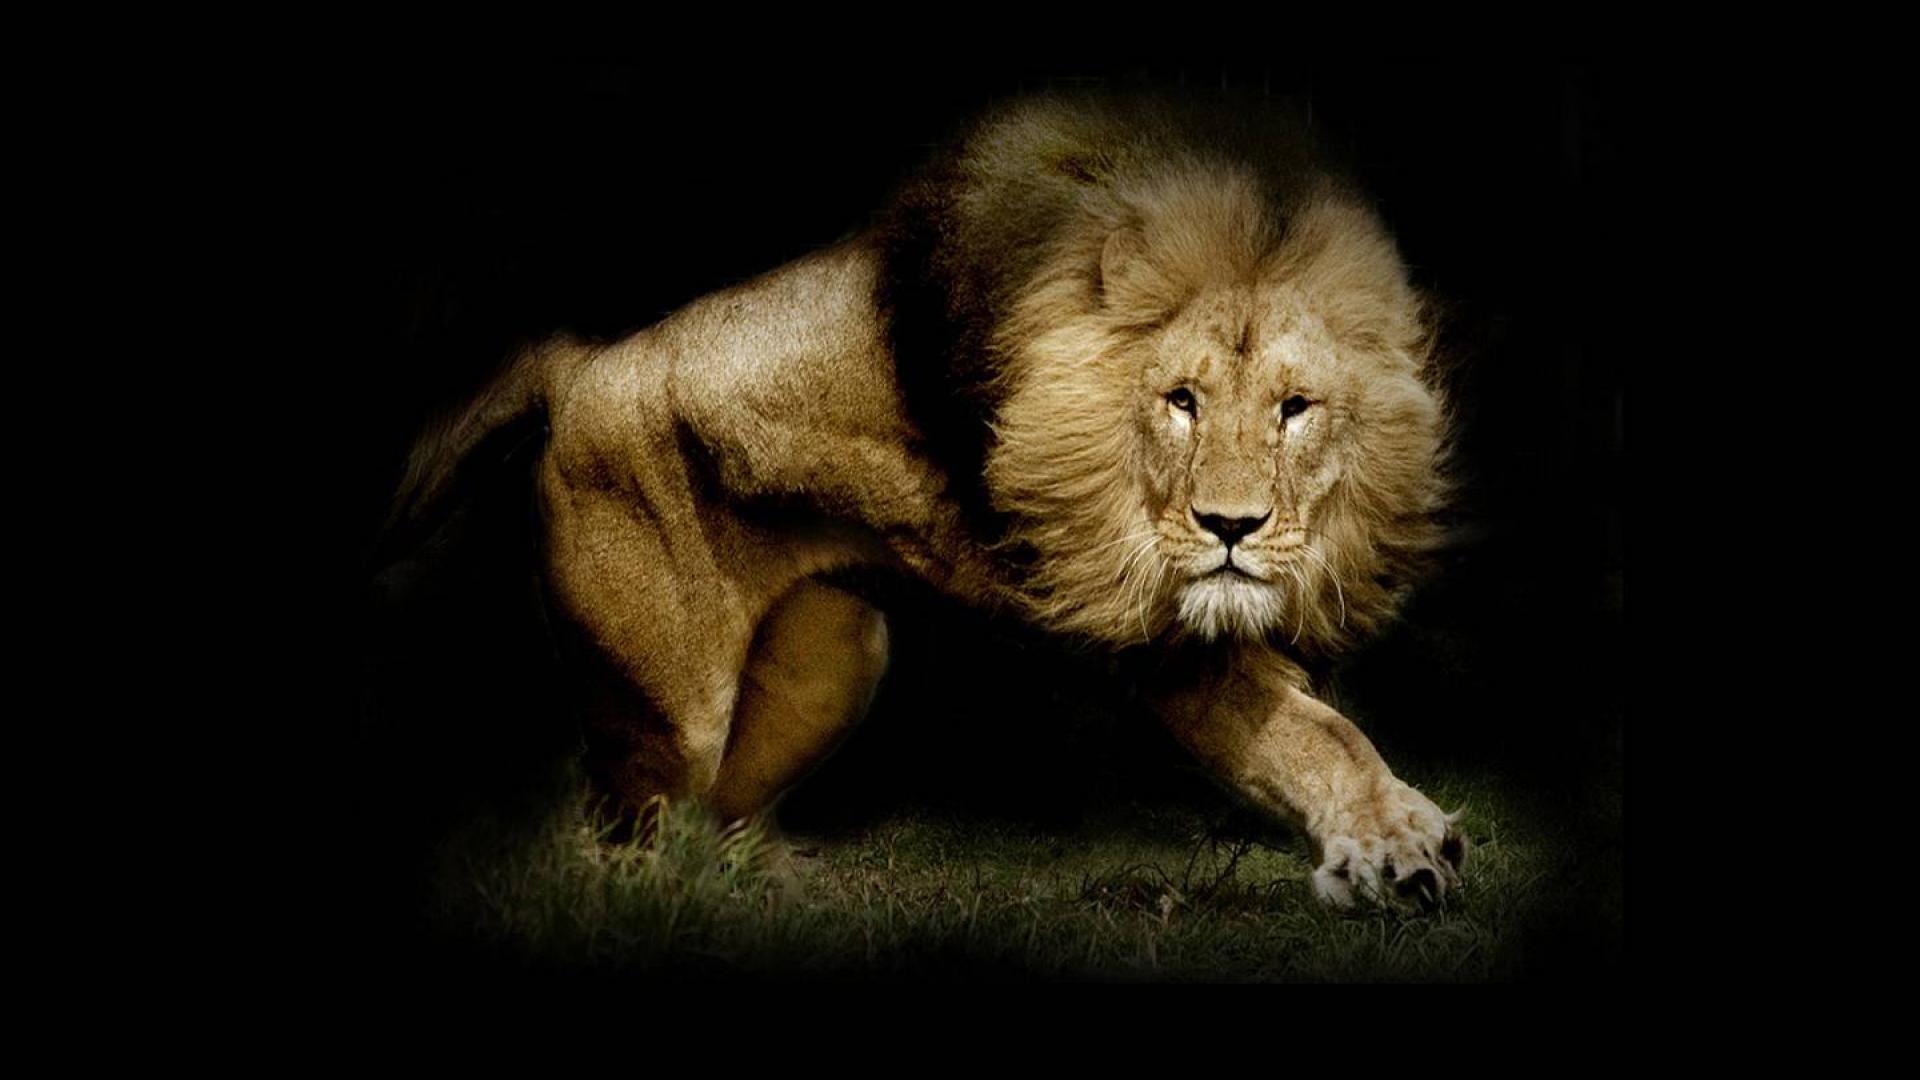 Lion Wallpapers Best Wallpapers 1920x1080